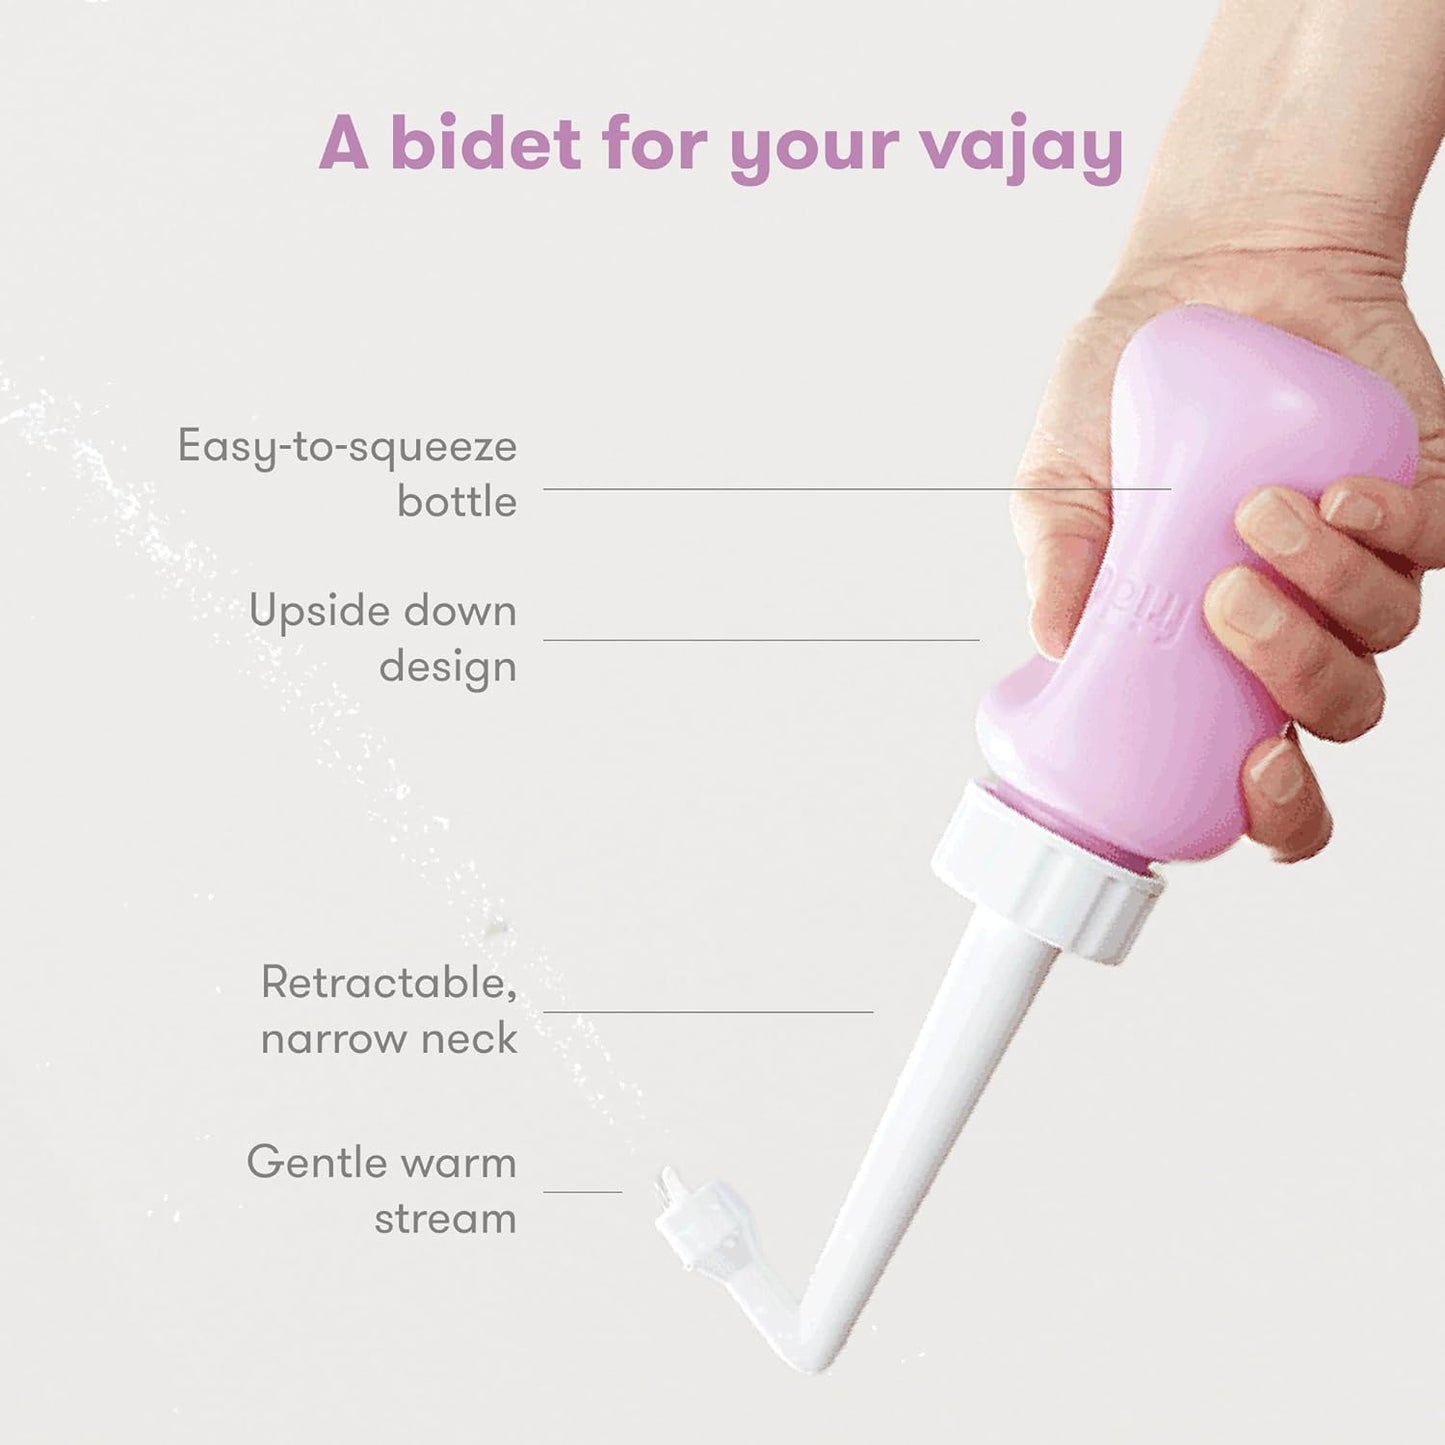 Frida Mom Upside Down Peri Bottle for Postpartum Care The Original Fridababy MomWasher for Perineal Recovery and Cleansing After Birth